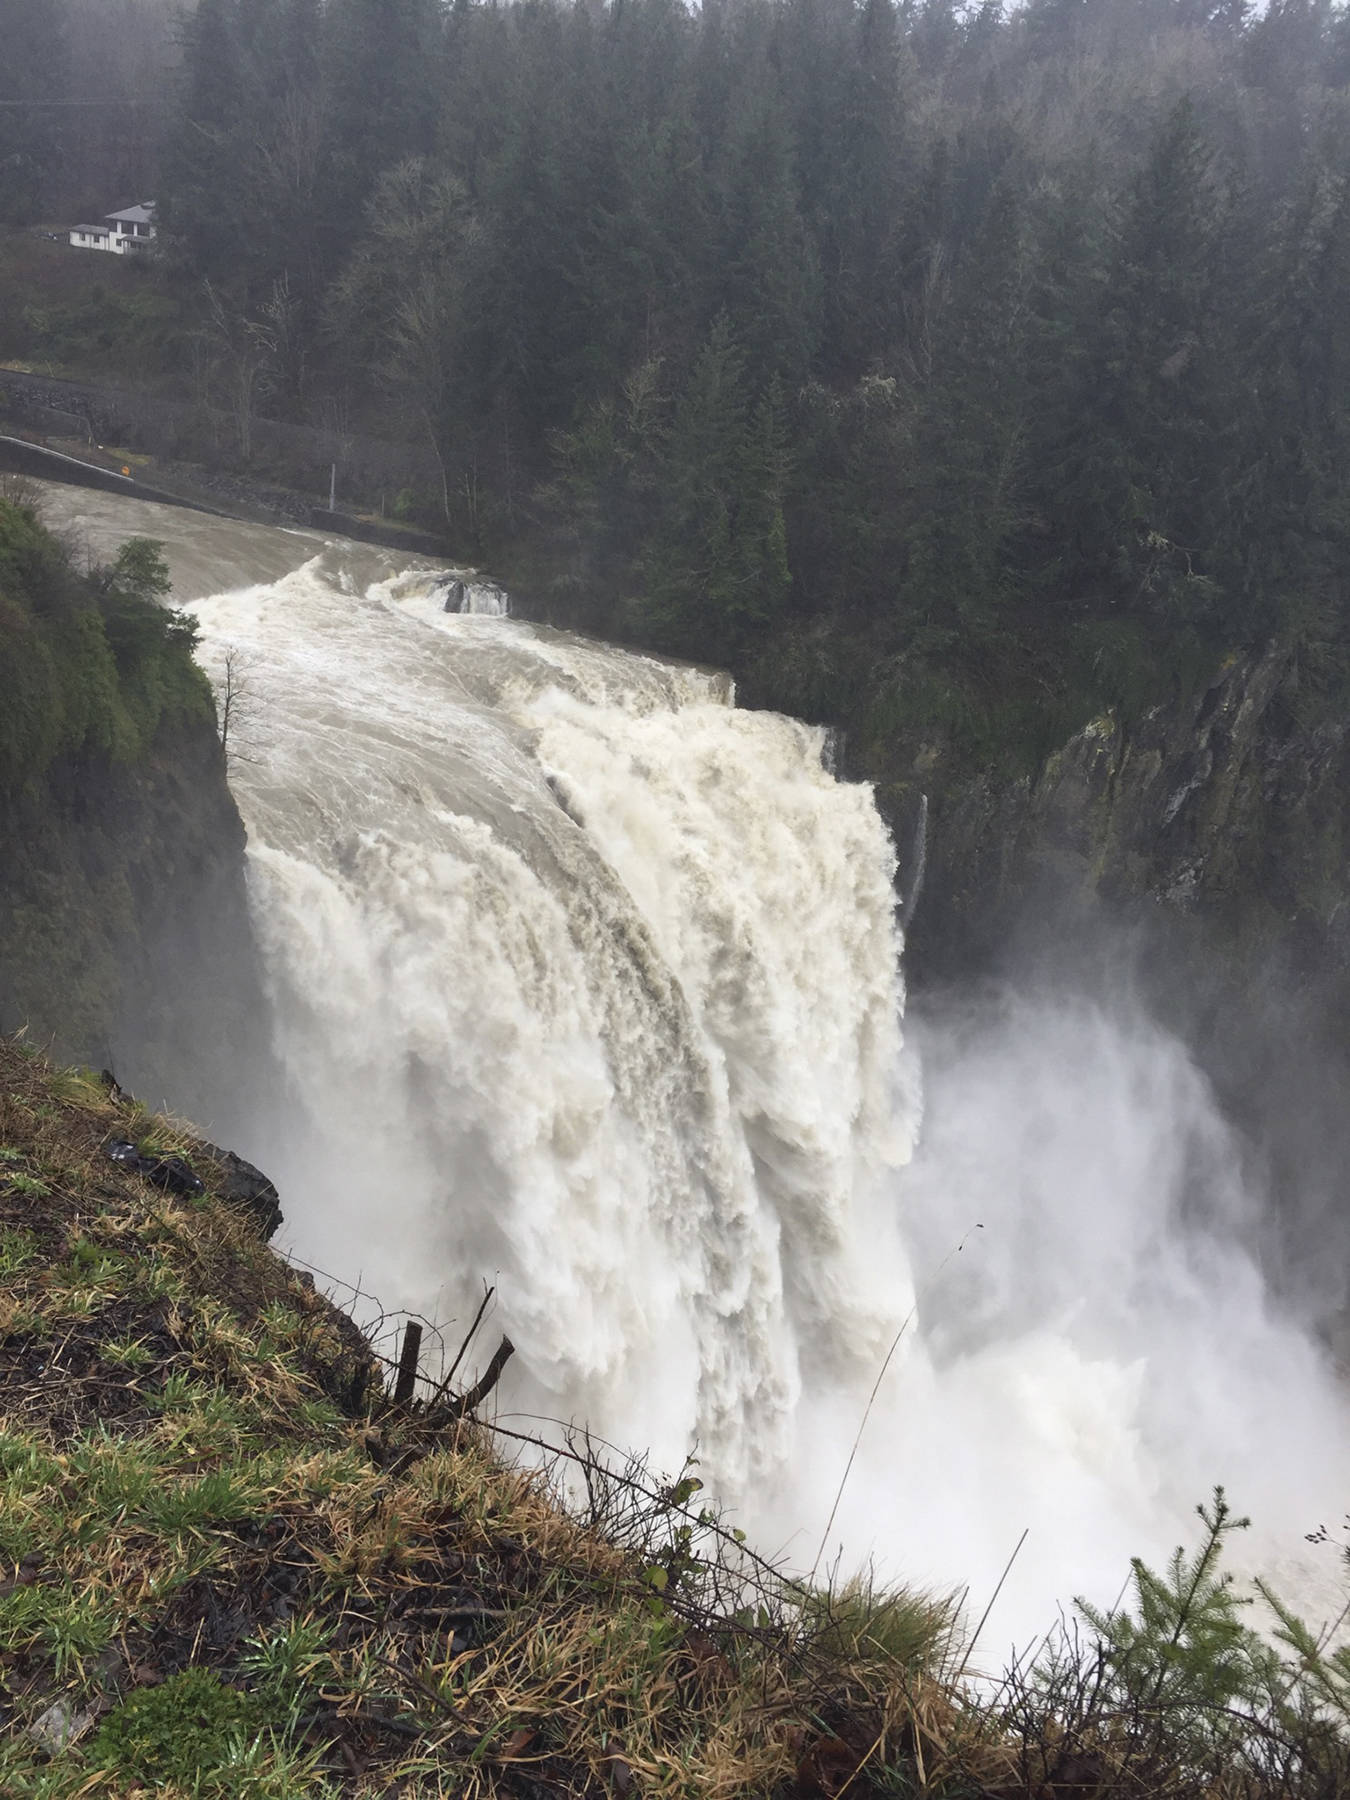 William Shaw/staff photo
The Snoqualmie Falls ran heavy with flood water on Feb. 7.